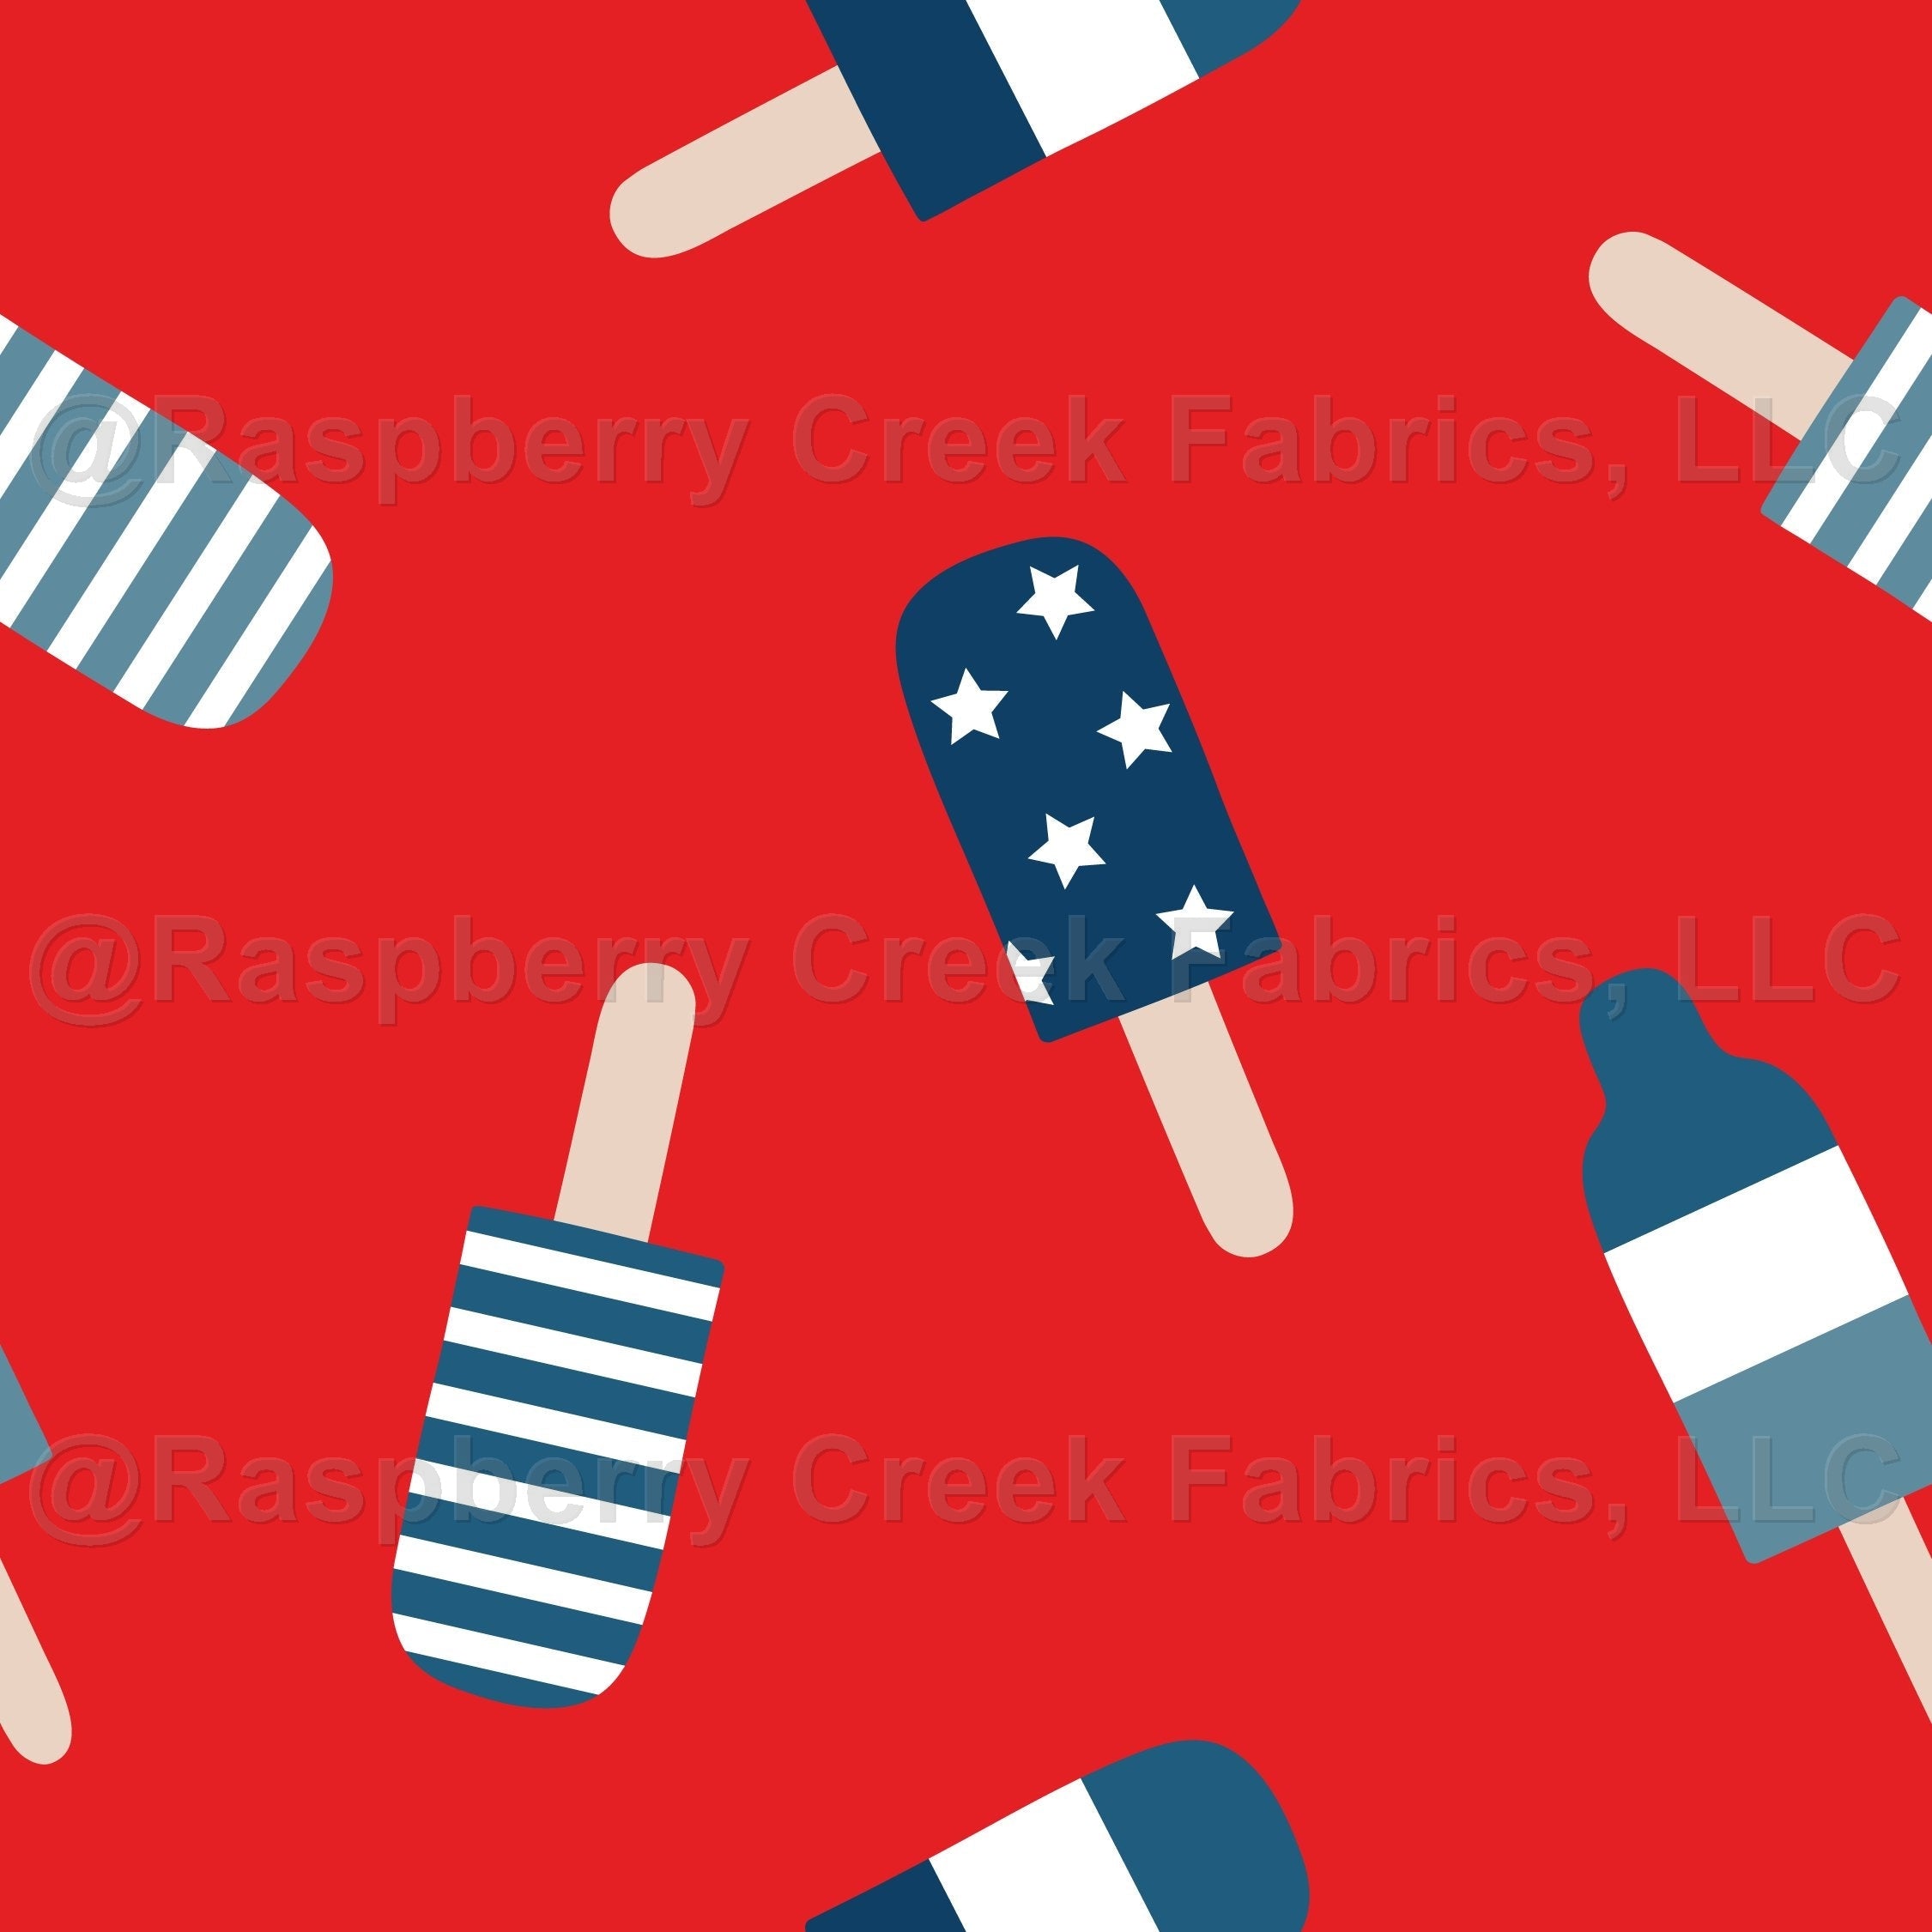 4th of July Popsicles on Red Fabric, Raspberry Creek Fabrics, watermarked